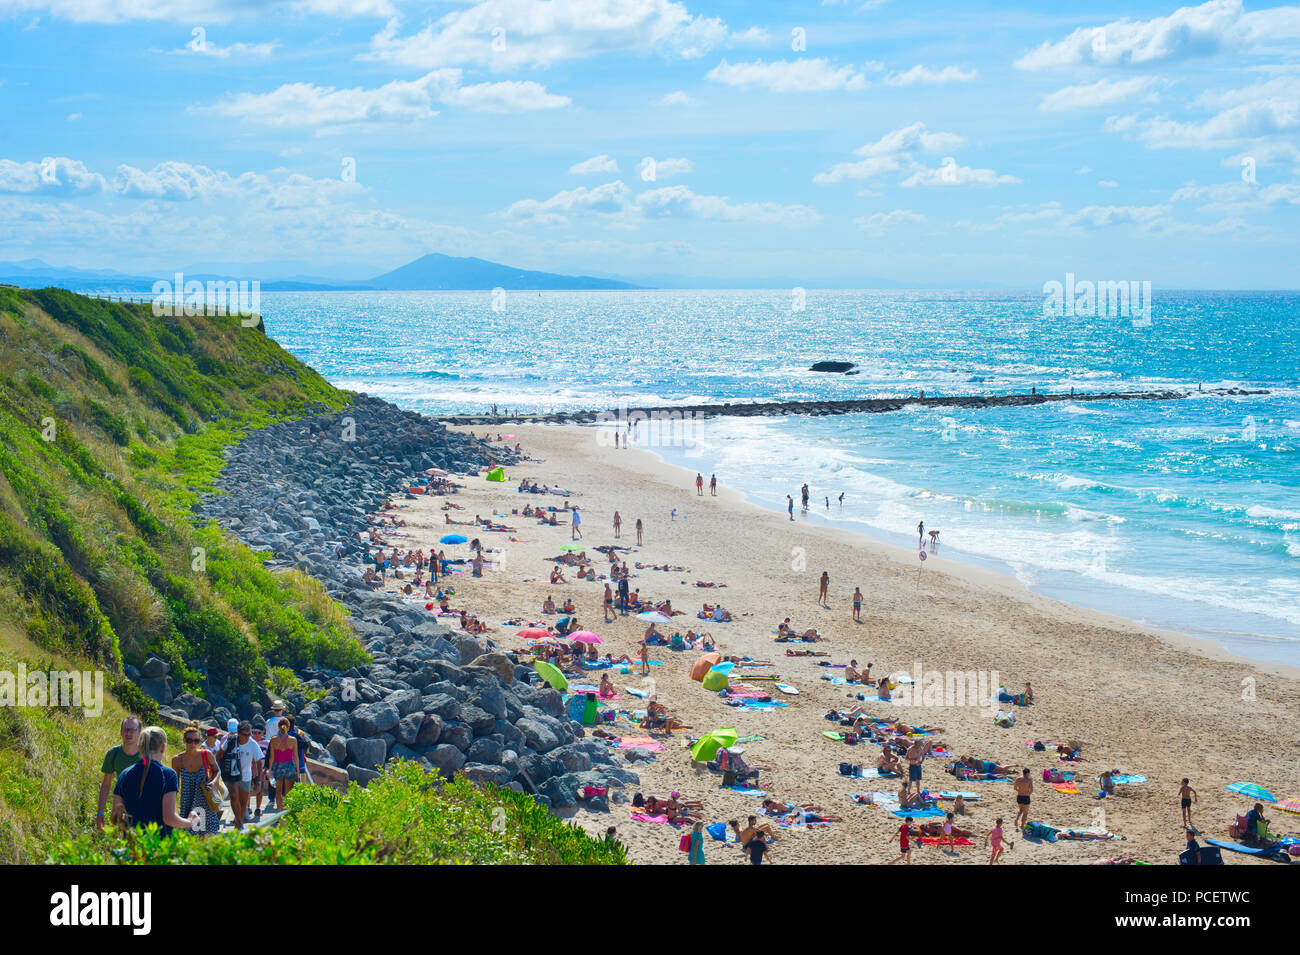 BIARRITZ, FRANCE - AUGUST 11, 2017: People at the Milady beach in a hot summer day. Biarritz famous summer vacation tourists destination. Stock Photo